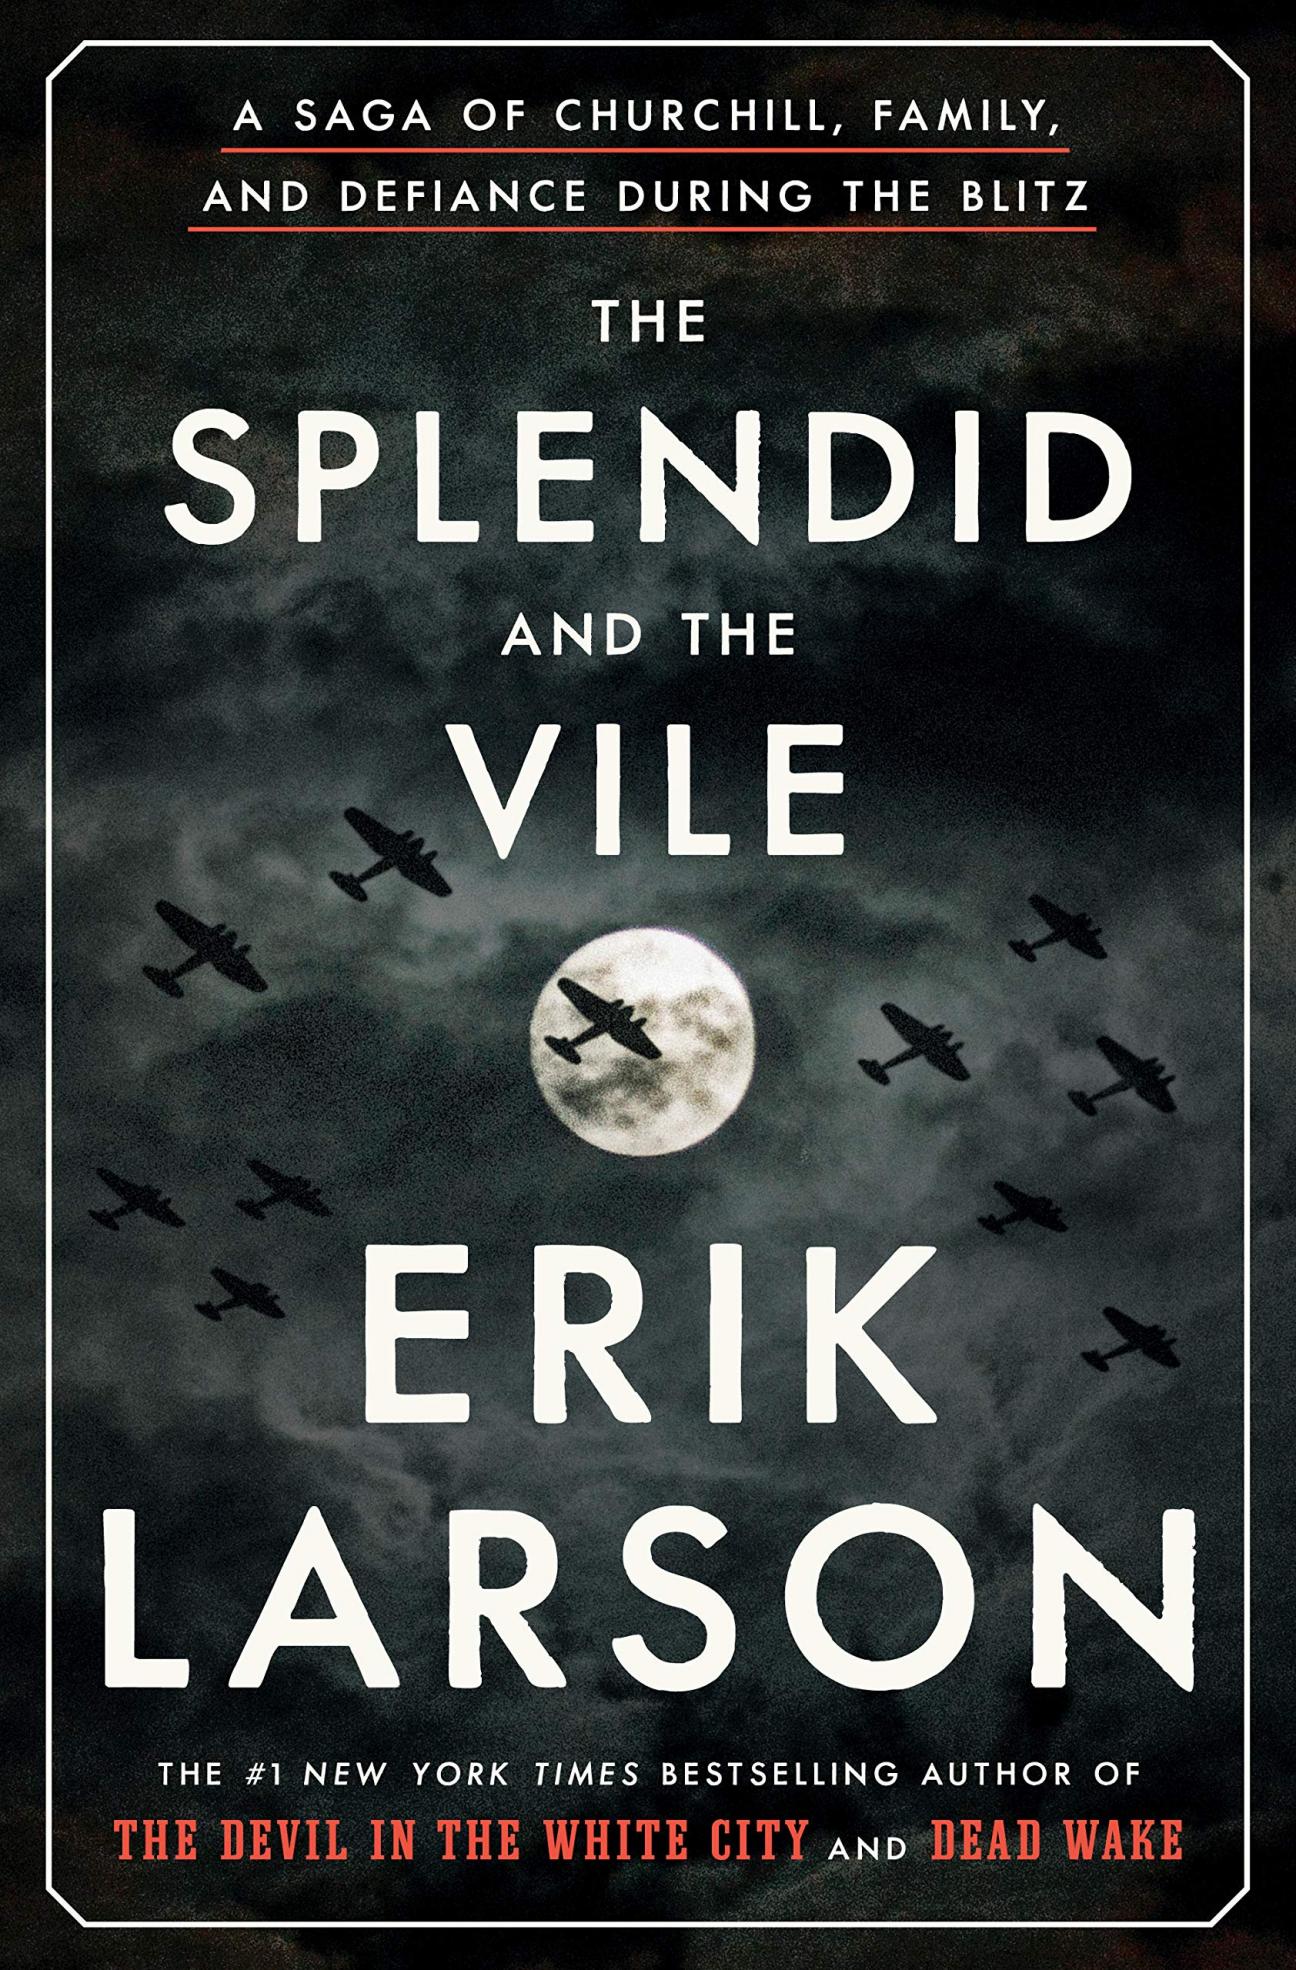 The Splendid and the Vile book cover